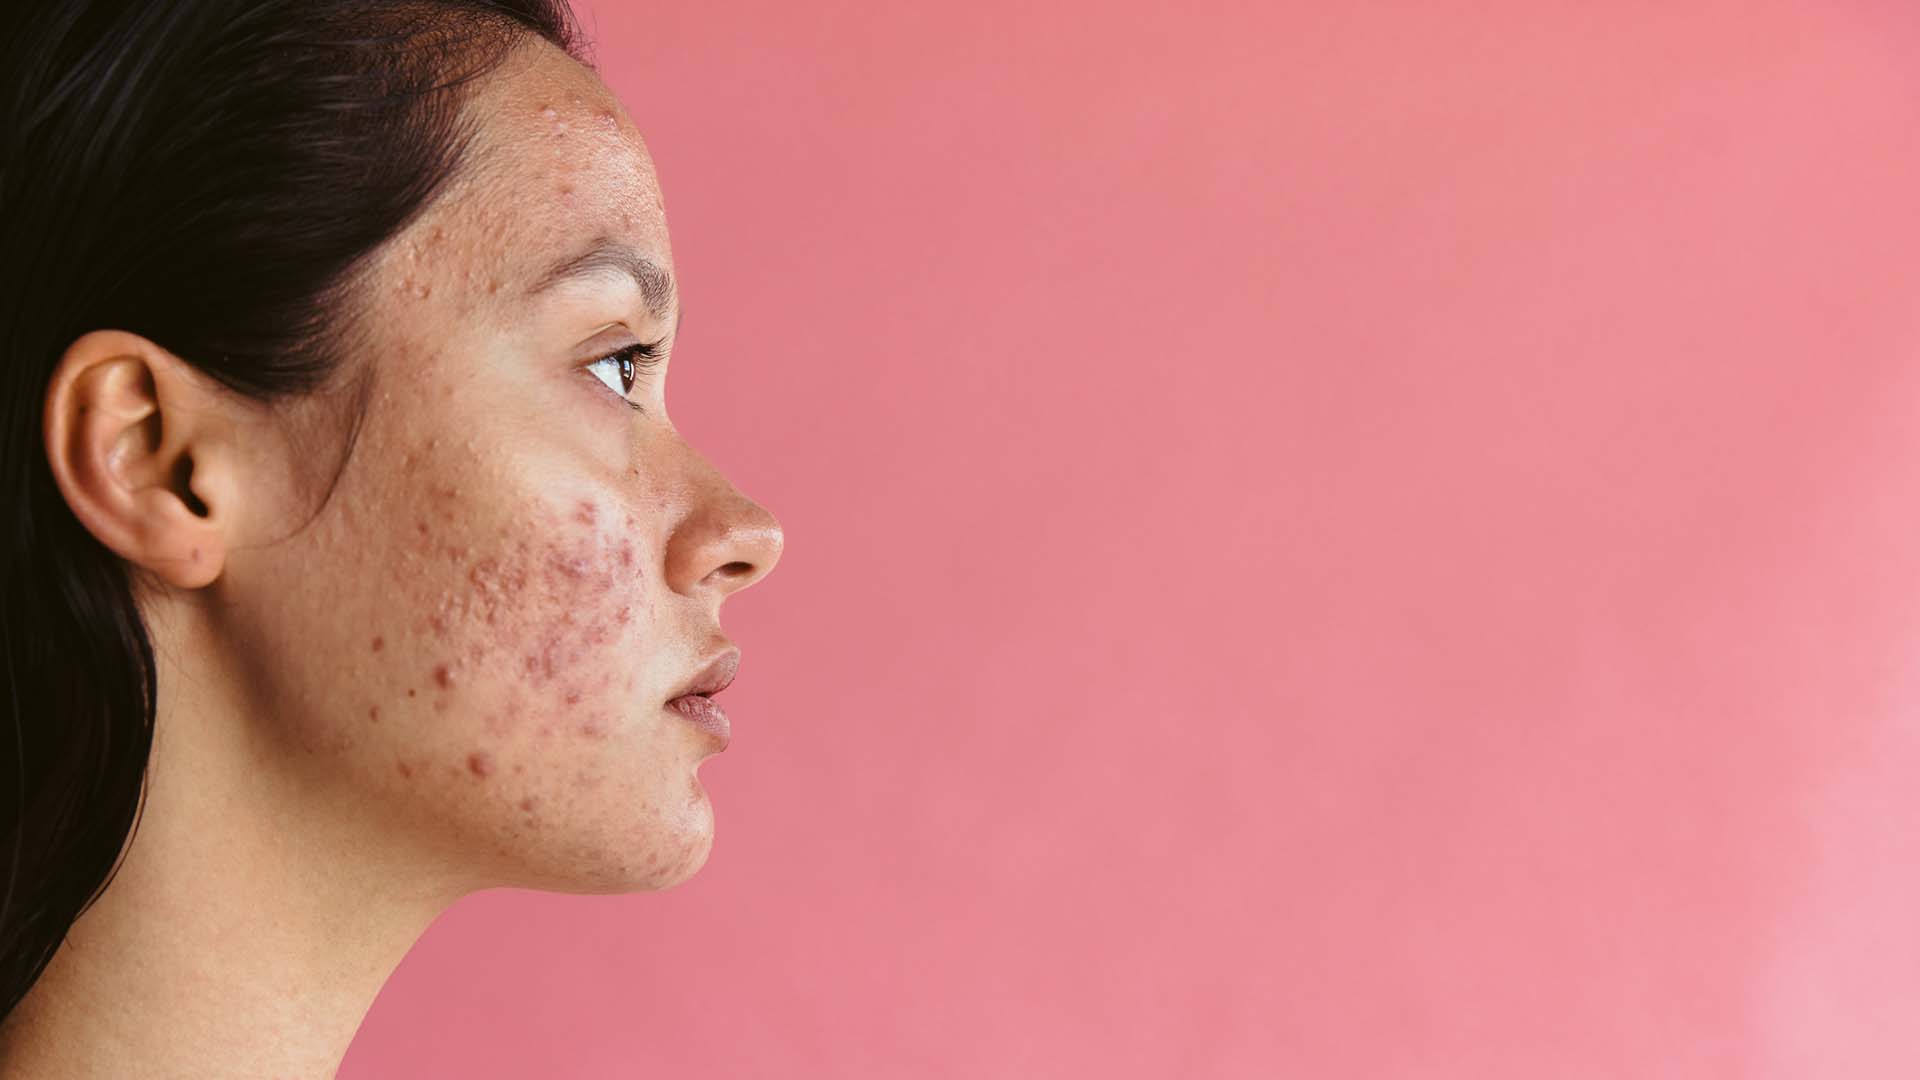 Understanding Types of Acne and Acne Severity